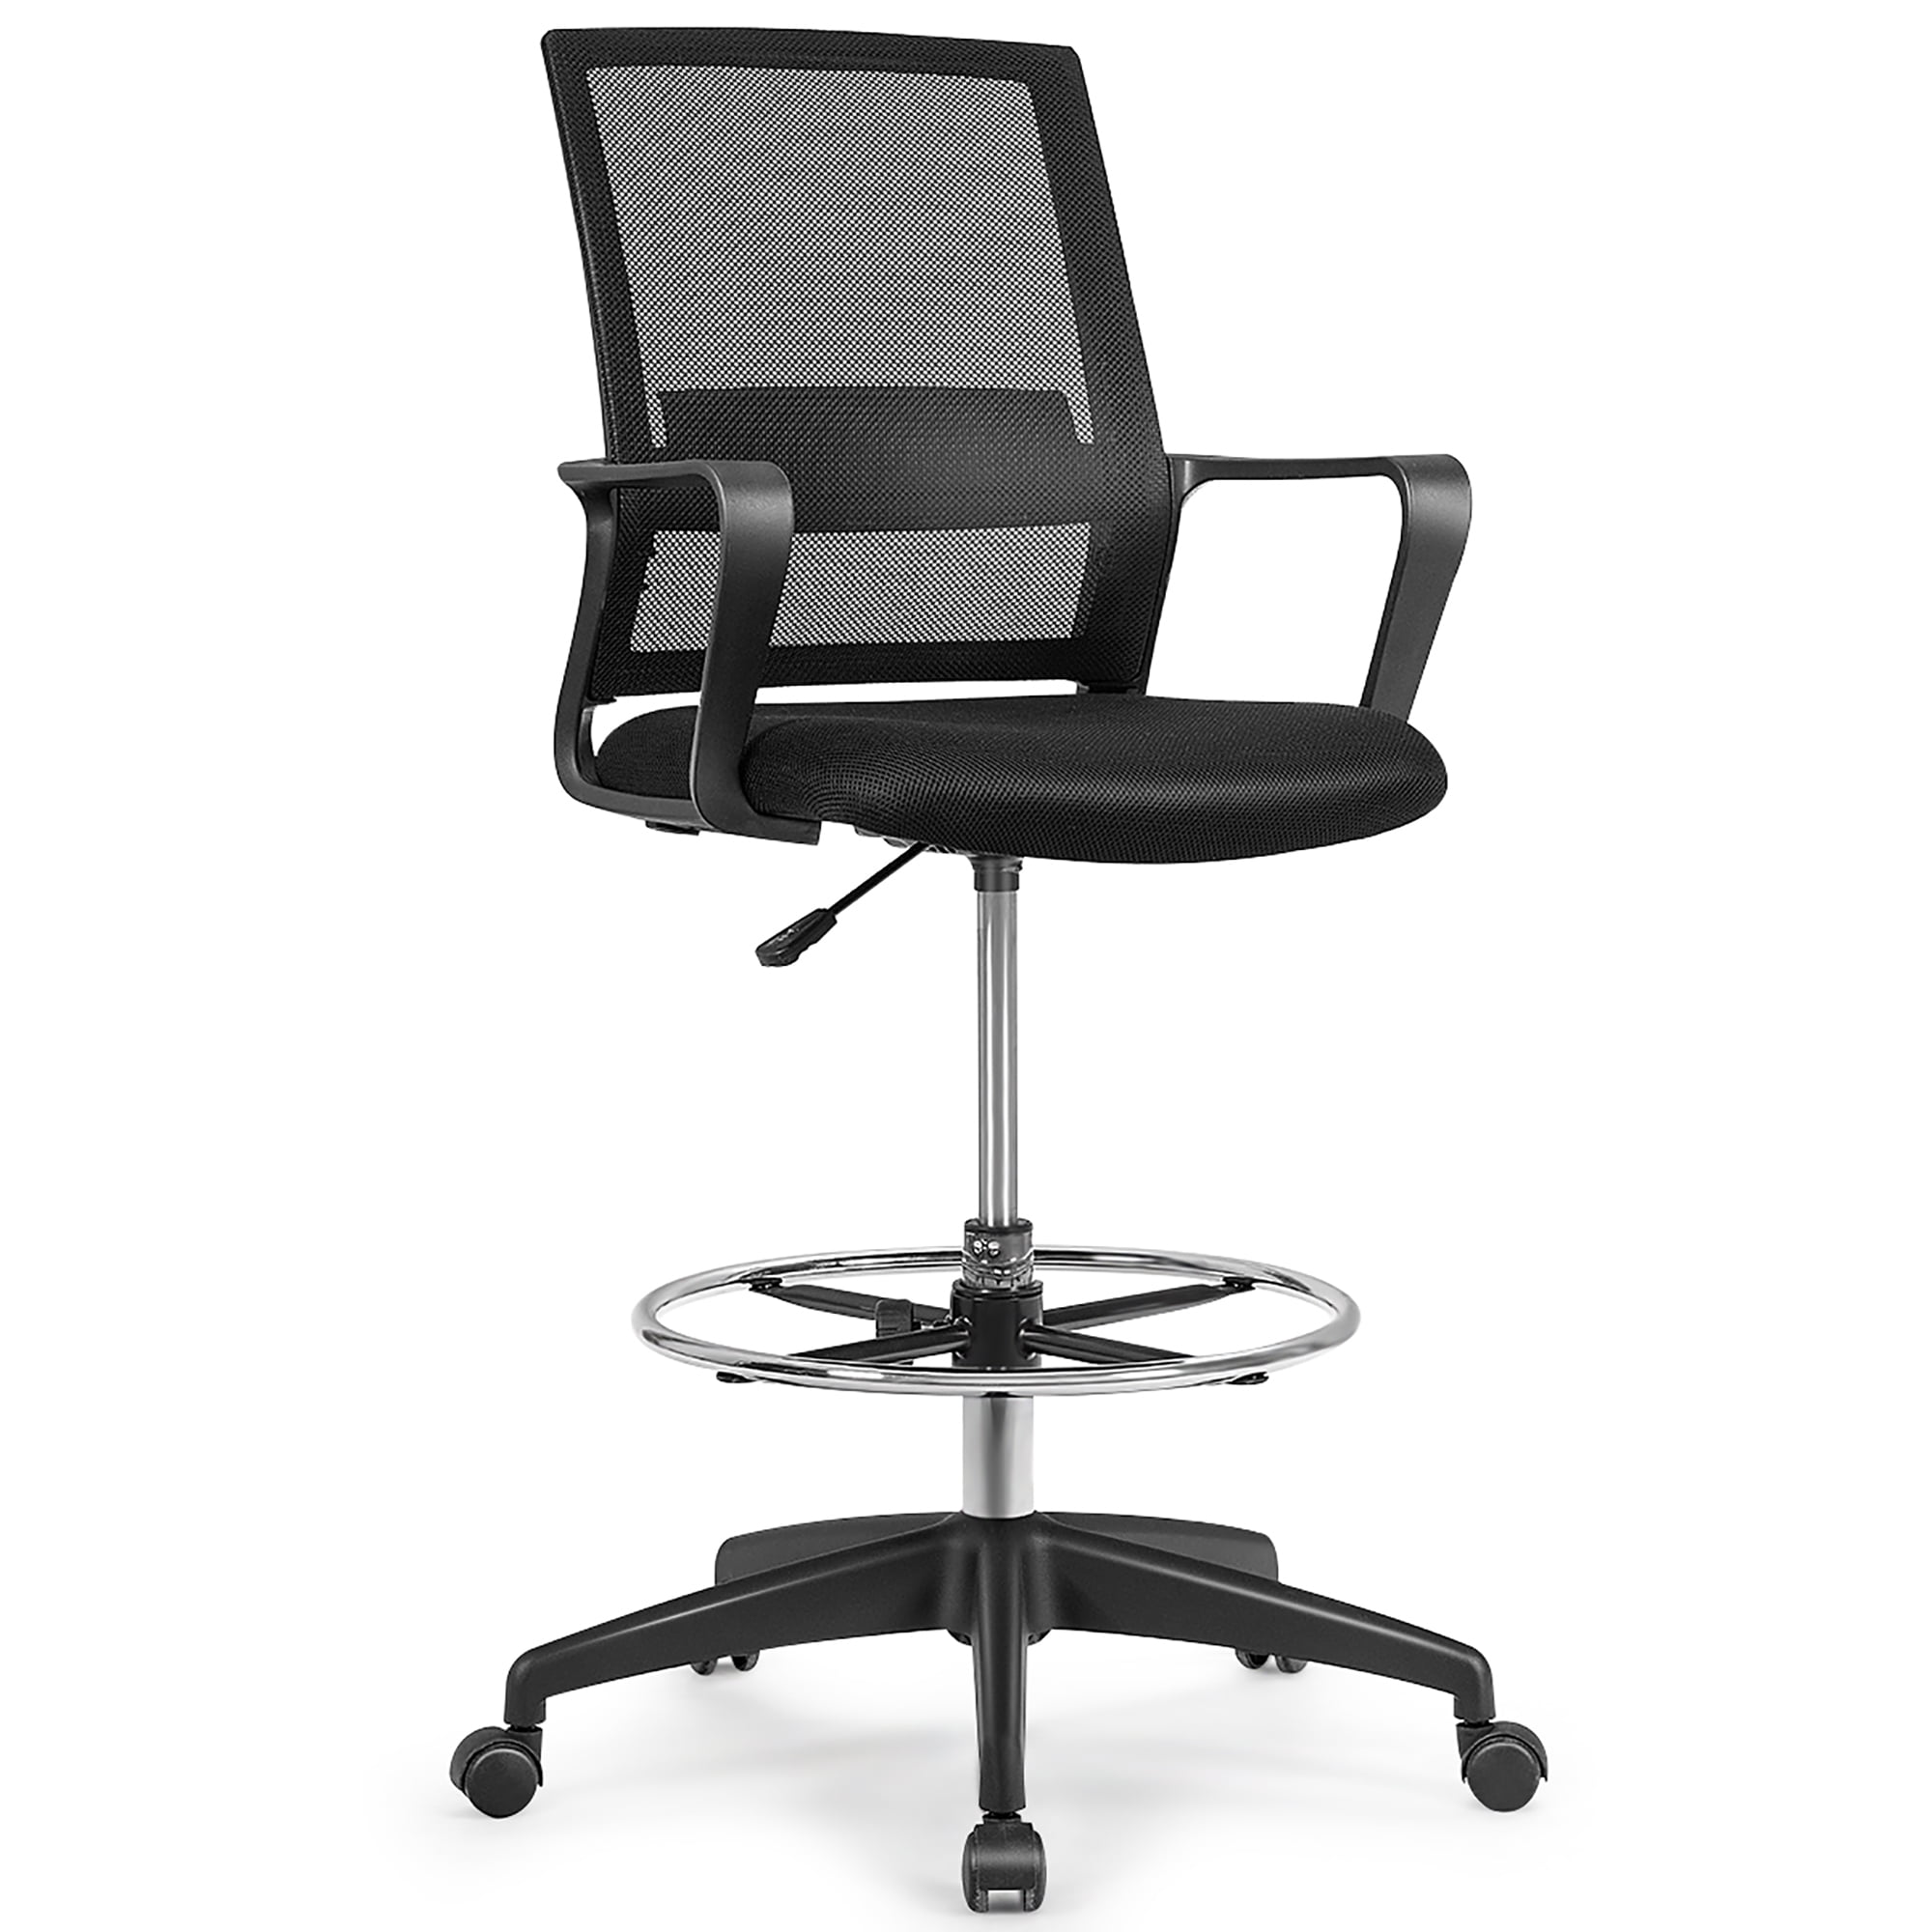 Ergonomic Tall Mesh Drafting Chair With Adjustable Swivel Seat in Black 